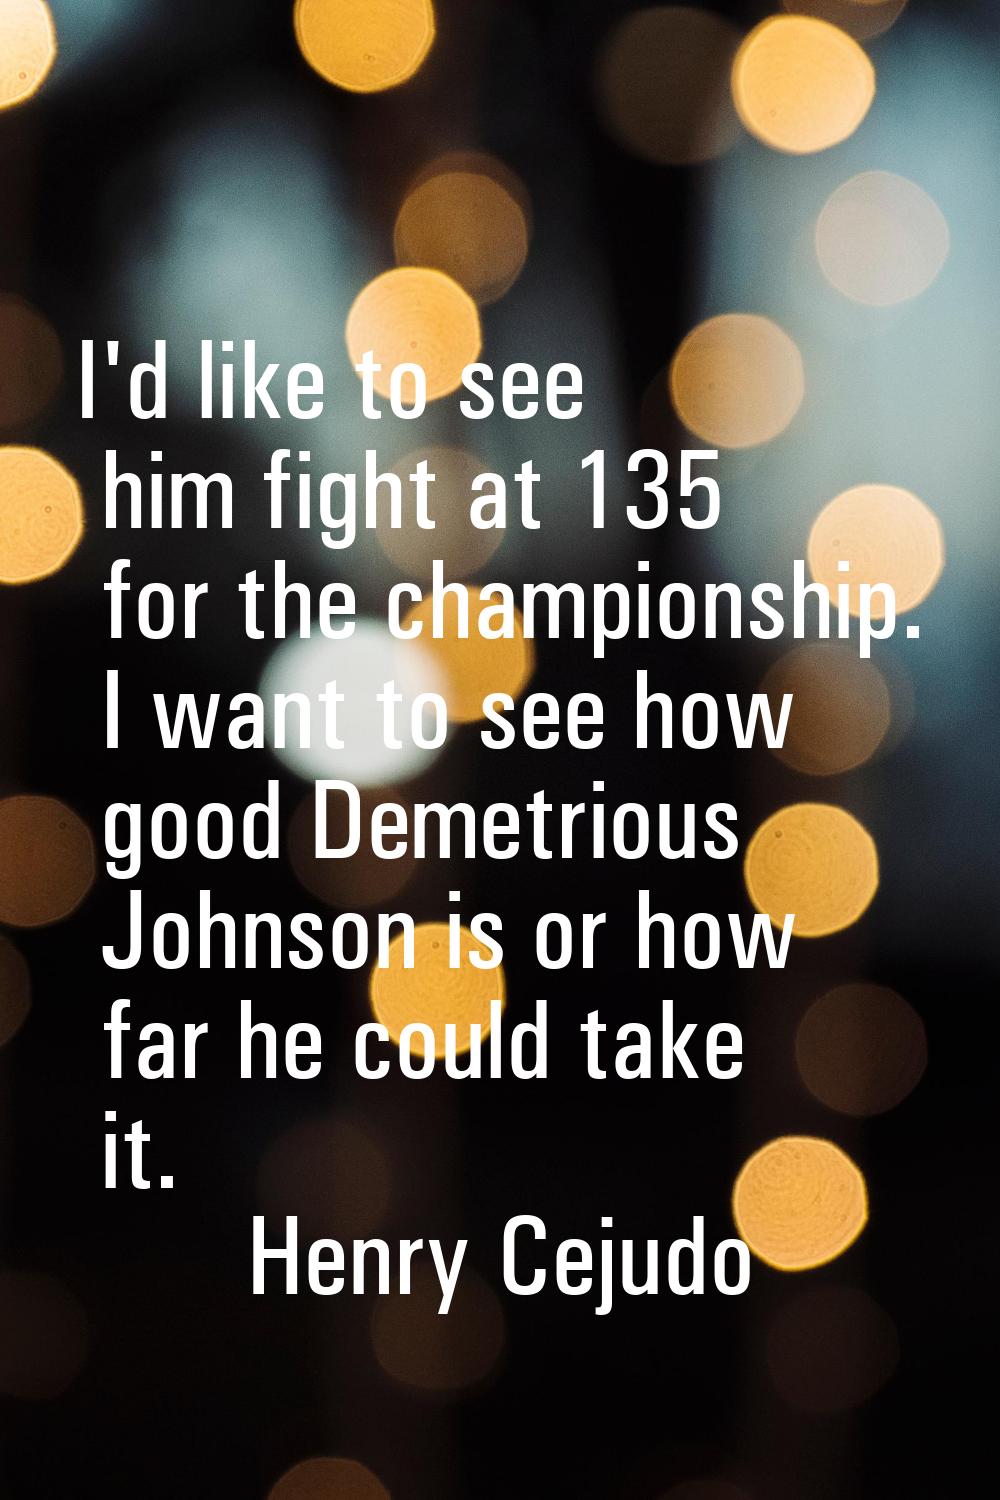 I'd like to see him fight at 135 for the championship. I want to see how good Demetrious Johnson is